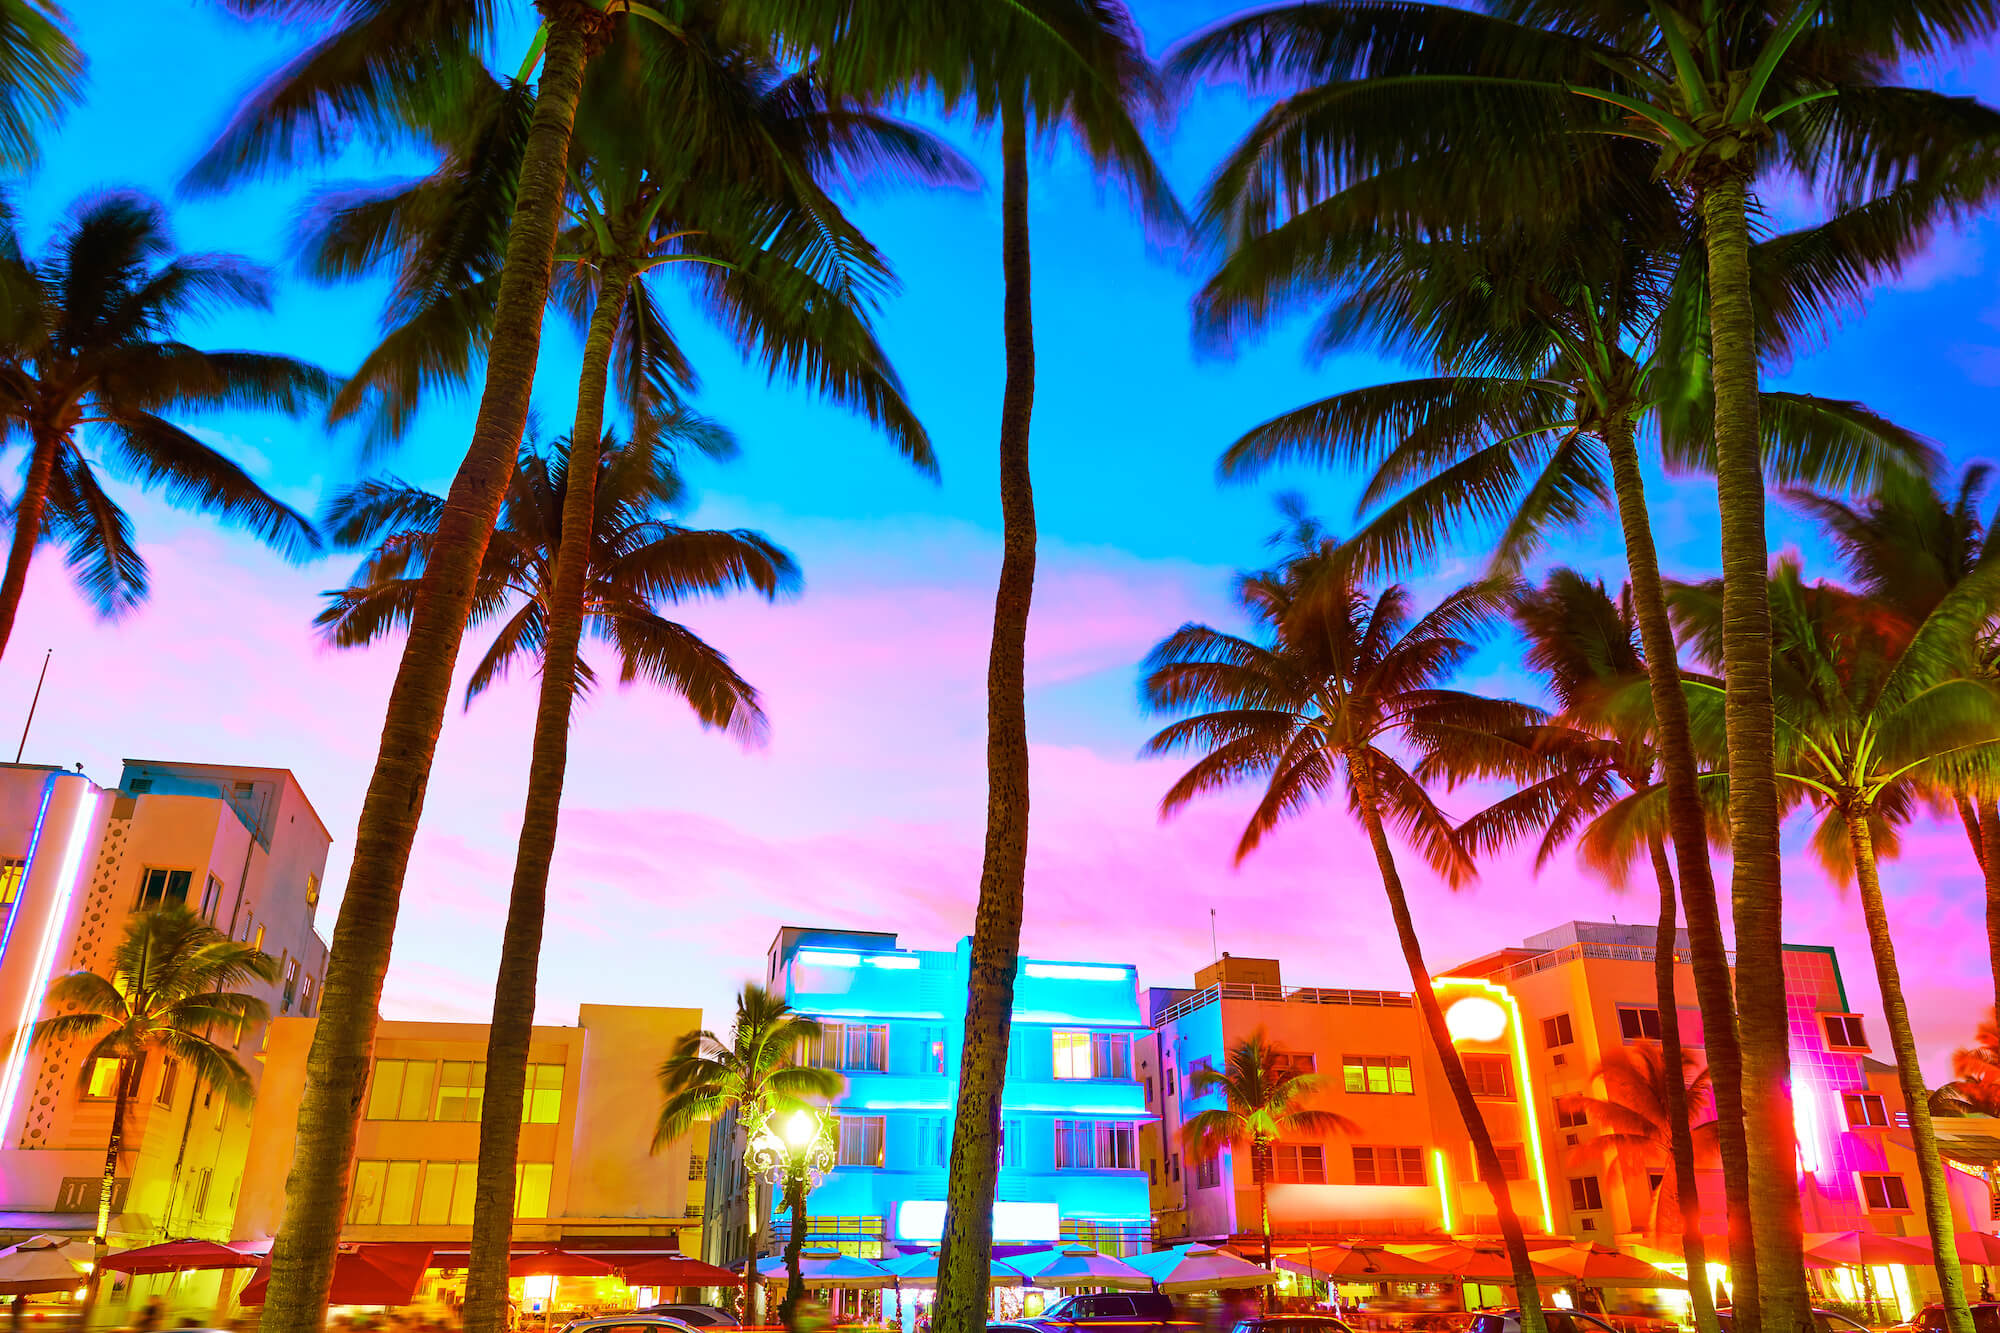 Ft. Lauderdale at night